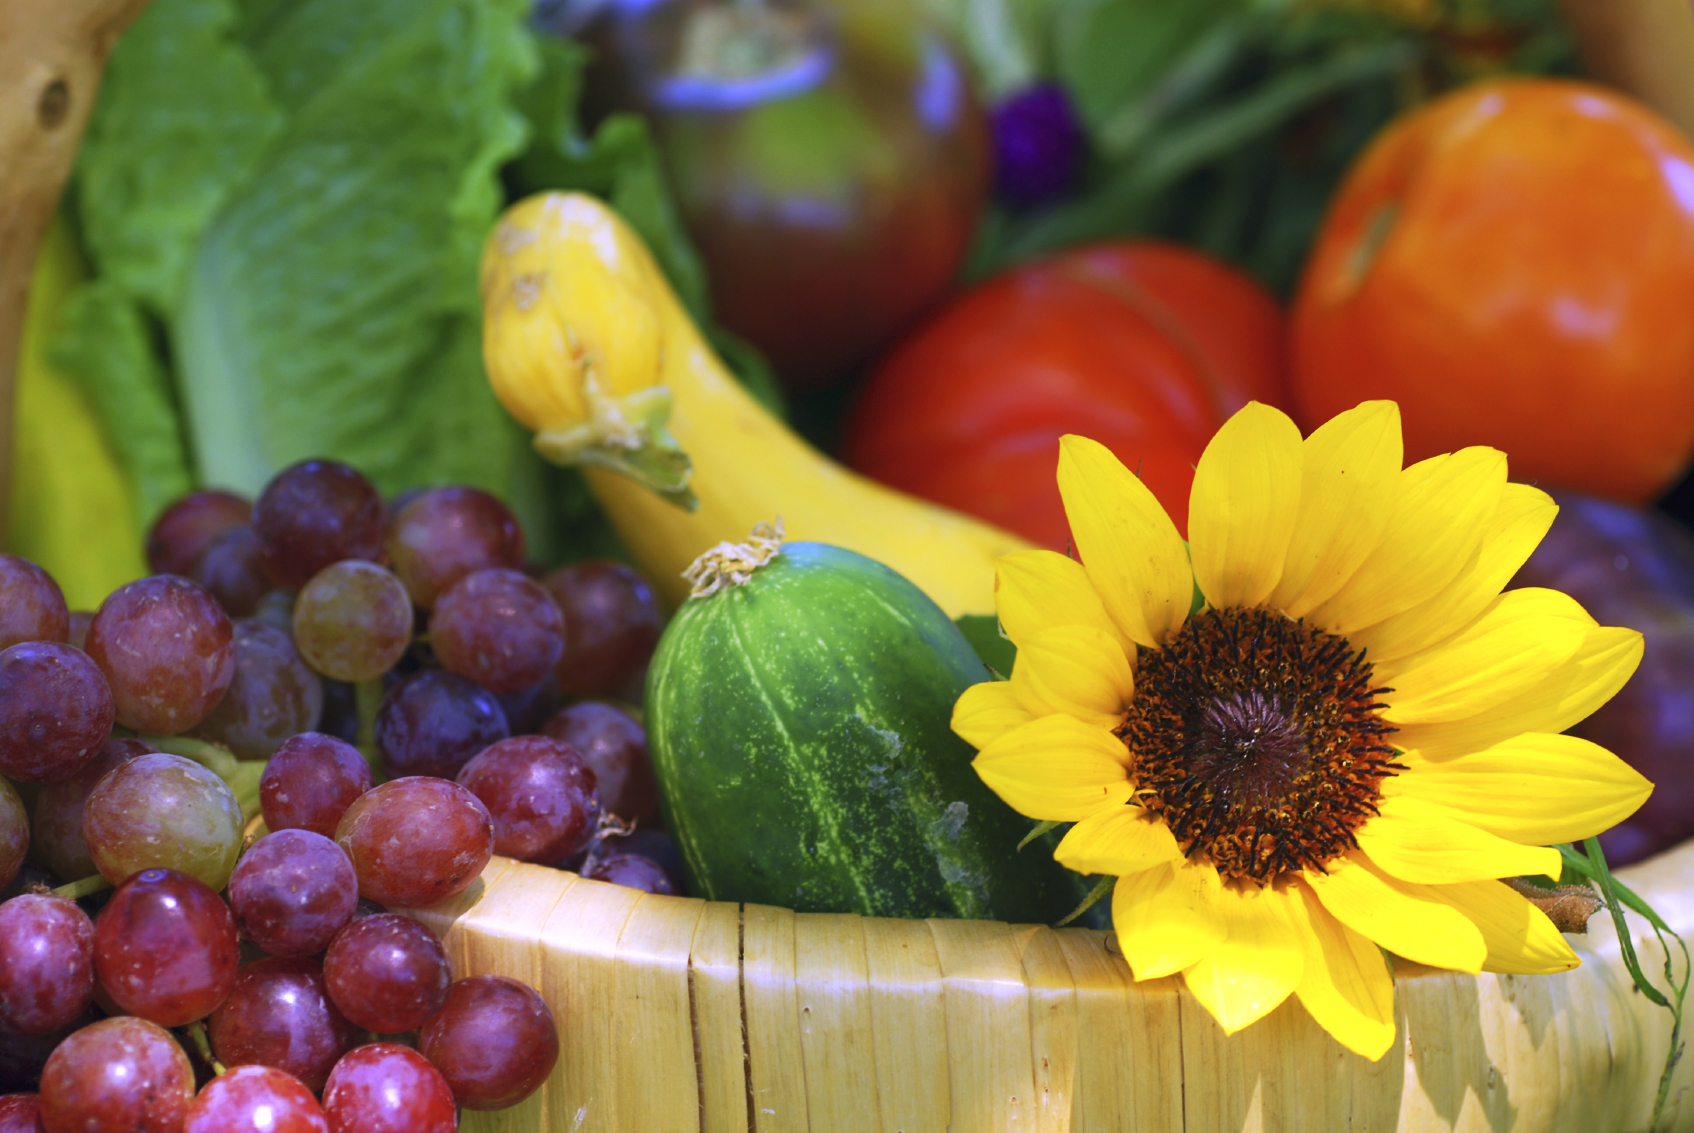 Garden Vegetables help to increase antioxidant levels at your Carson City dentist at Advanced Dentistry by Design